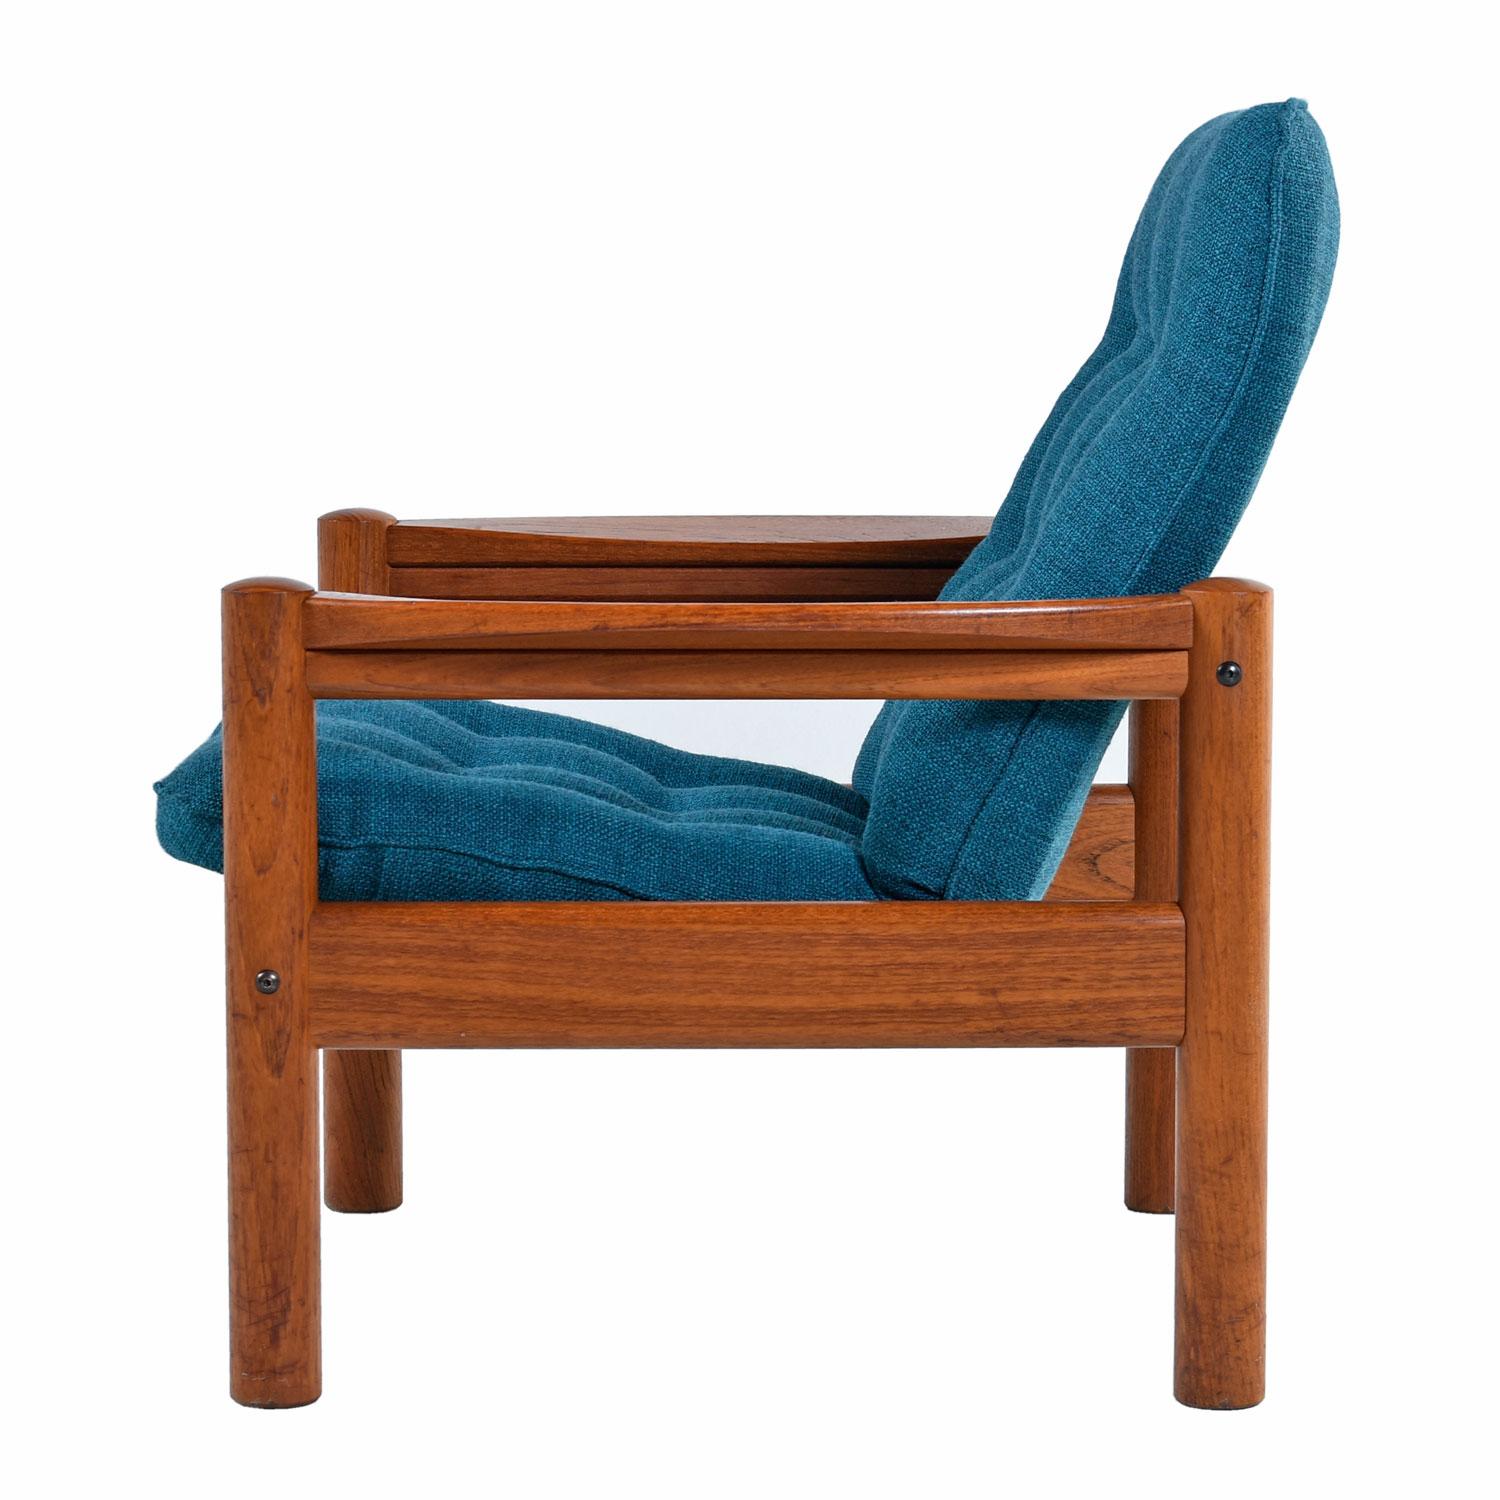 Our restoration team all agreed that this new blue woven fabric complimented the teak frame just perfectly. This Domino Mobler solid teak lounge chair was restored to excellent condition. Solid teak frames with rigid construction. The sculpted arms